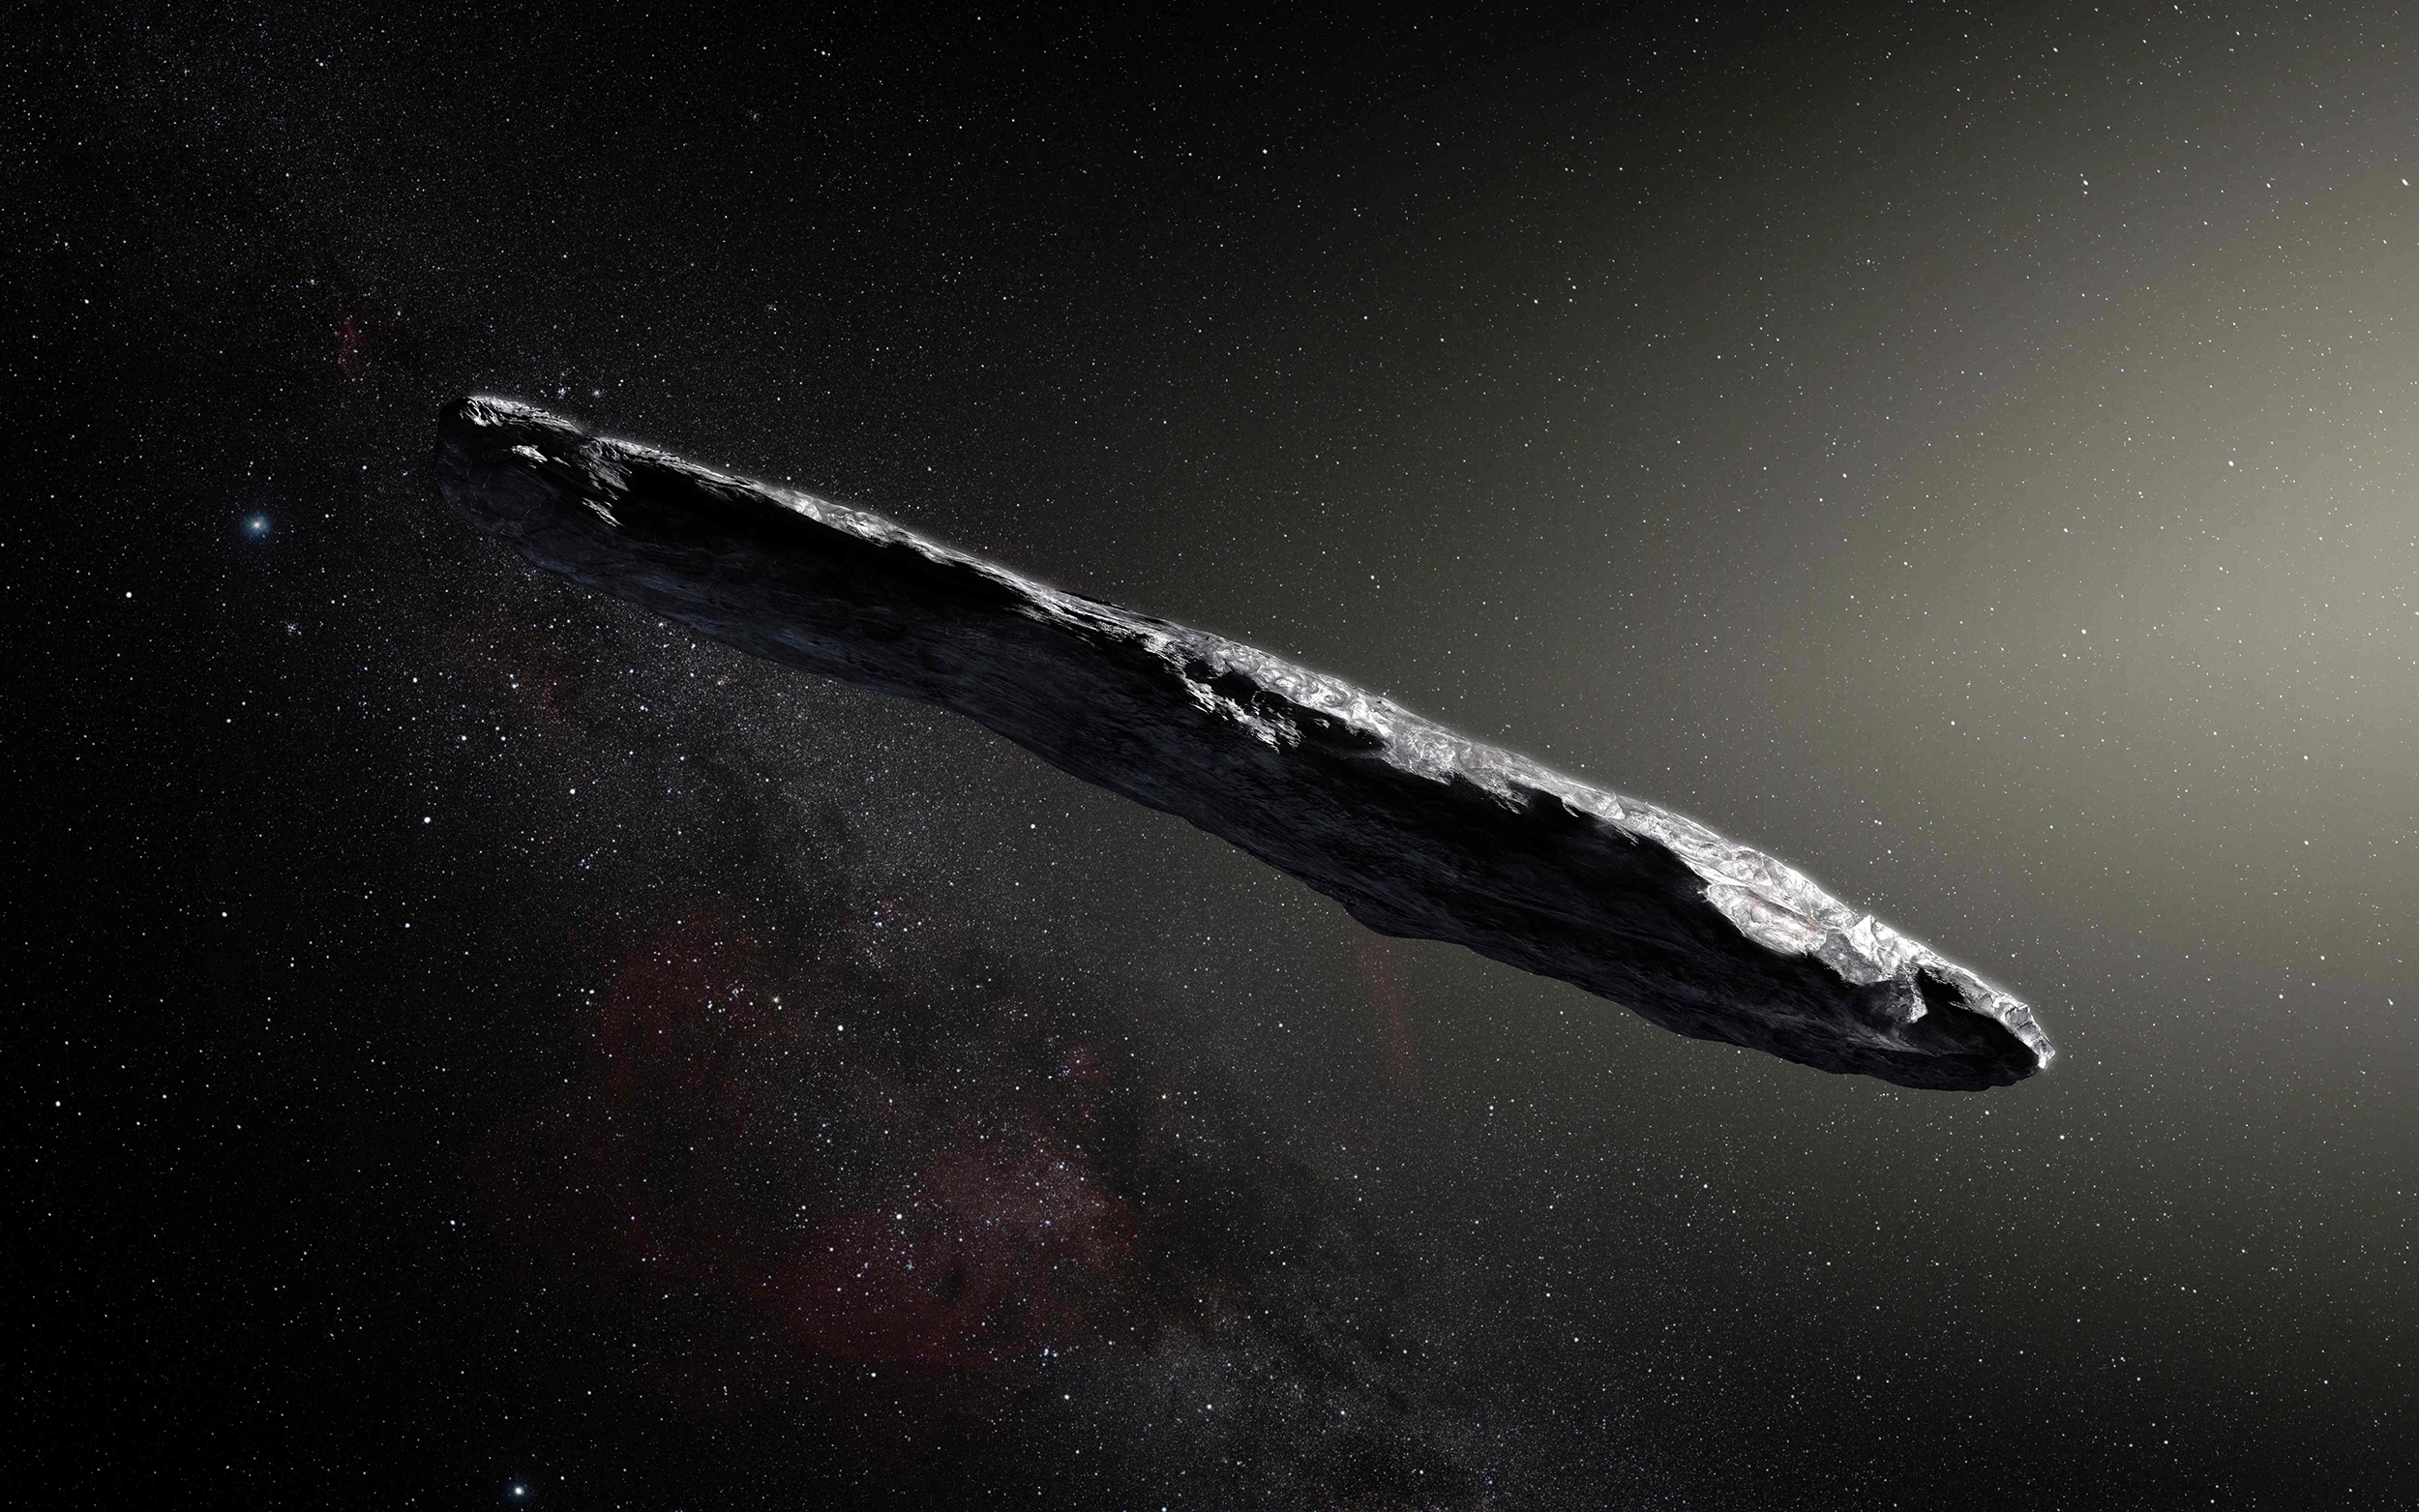 Oumuamua: A Closer Look at the Mysterious Alien Spacecraft Comet